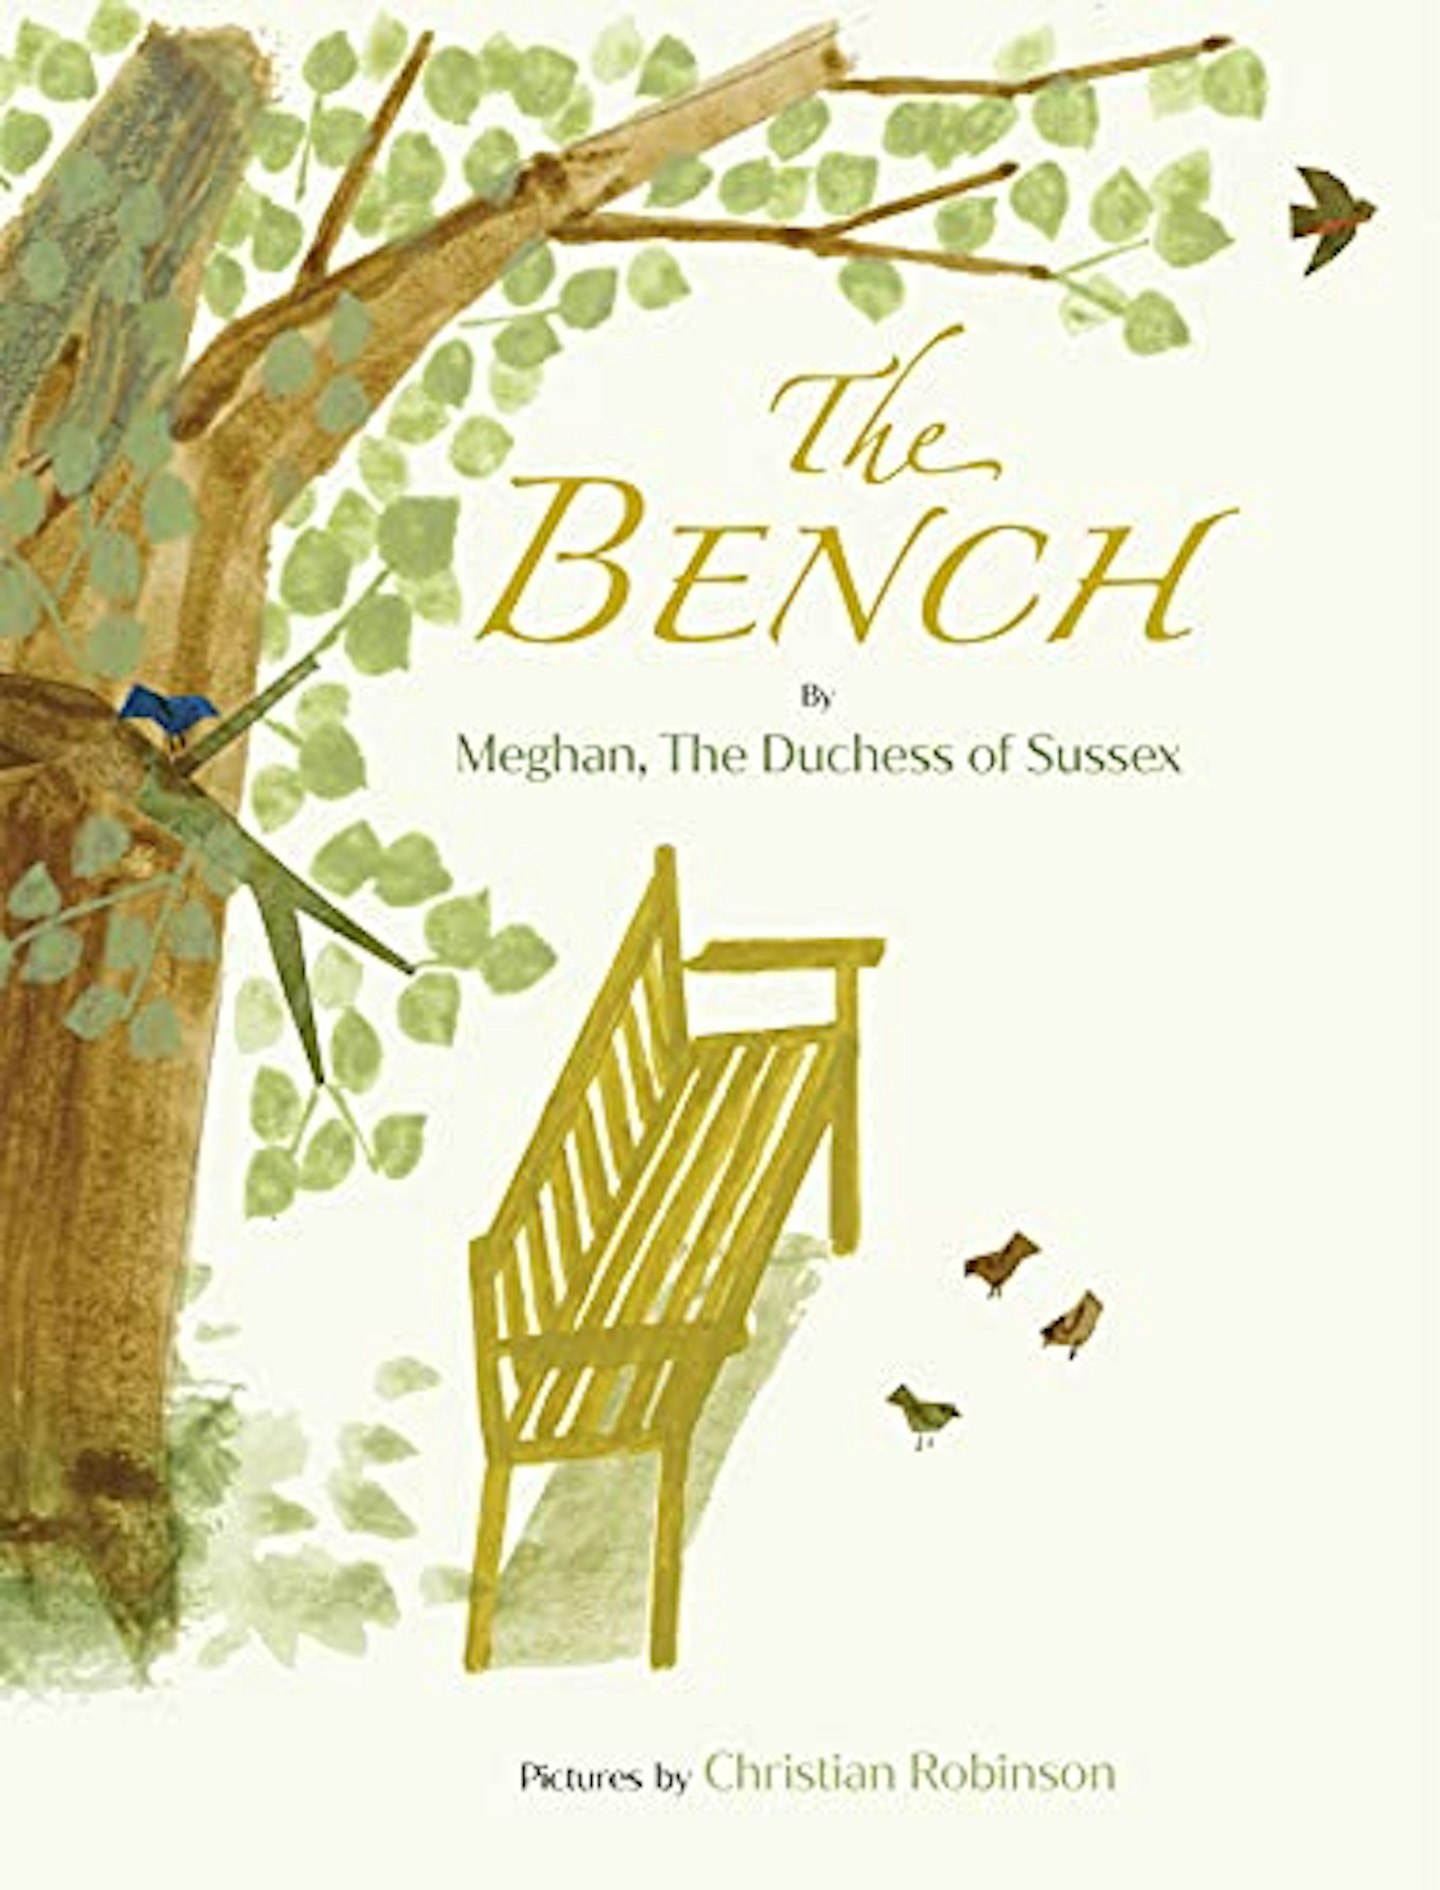 The Bench by Meghan Markle